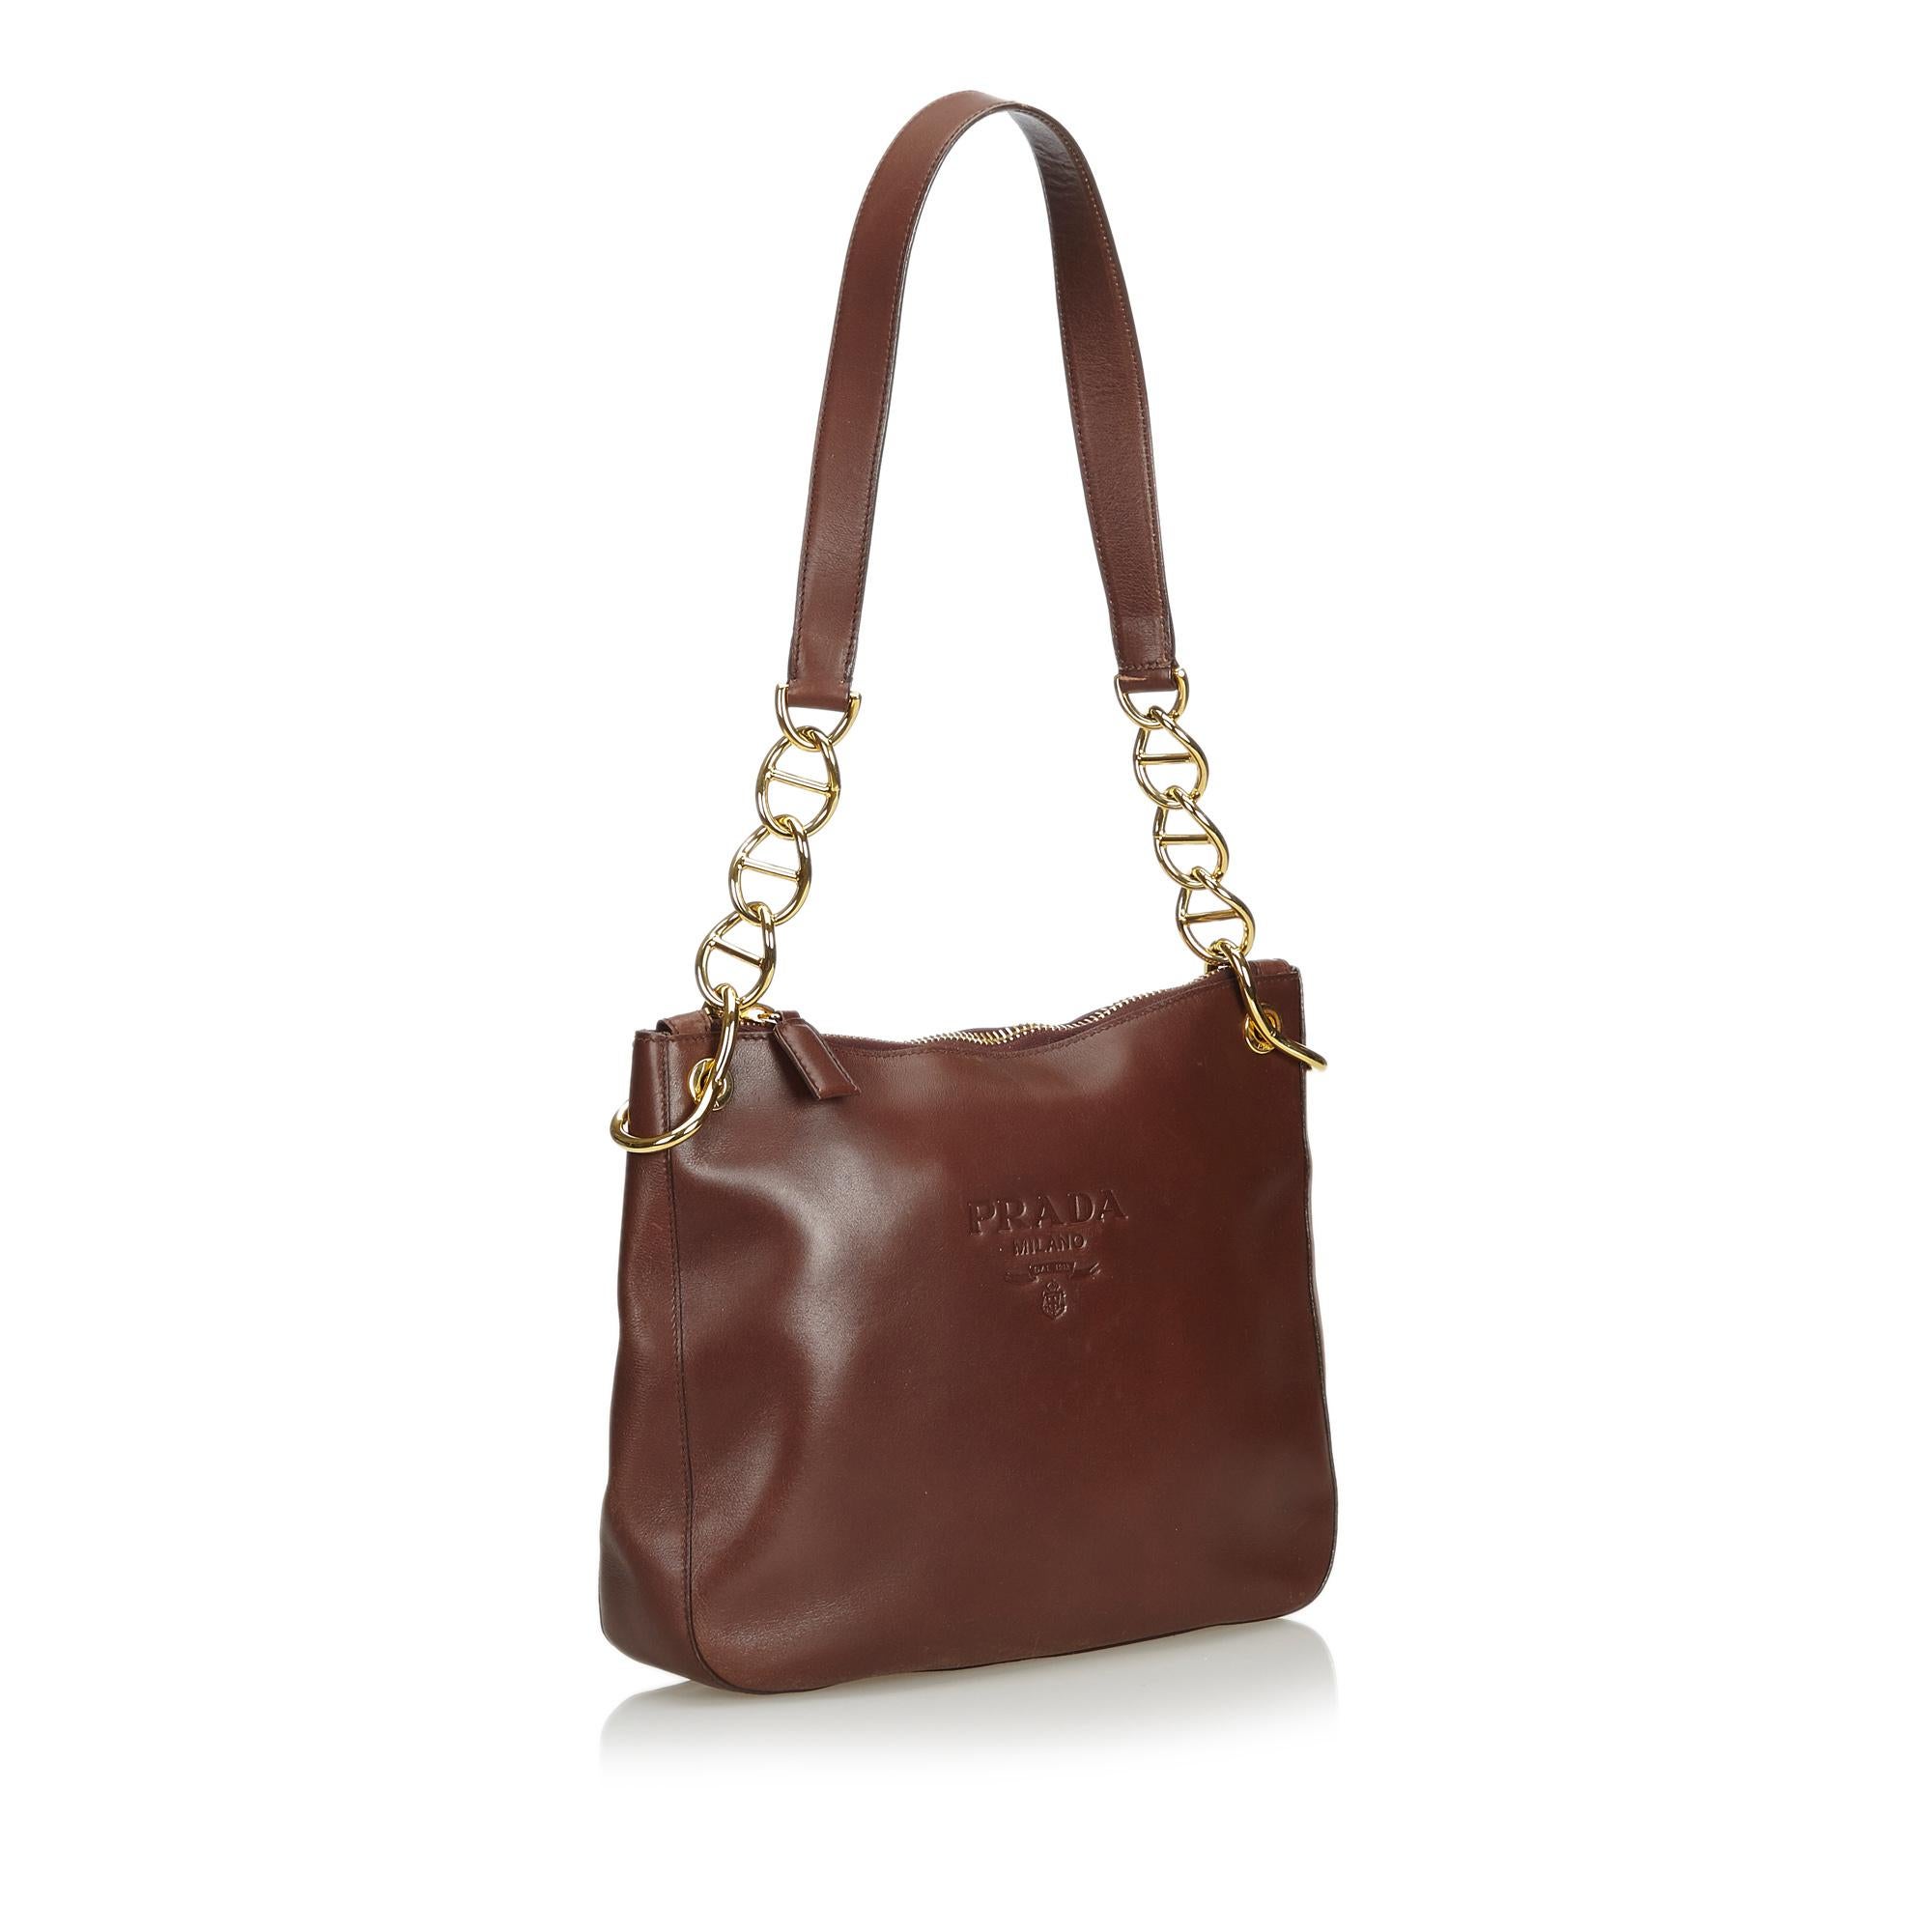 This shoulder bag features a calf leather body, flat leather straps with gold tone chain, a top zip closure, and an interior zip pocket. It carries as B condition rating.

Inclusions: 
Dust Bag

Dimensions:
Length: 23.00 cm
Width: 29.00 cm
Depth: